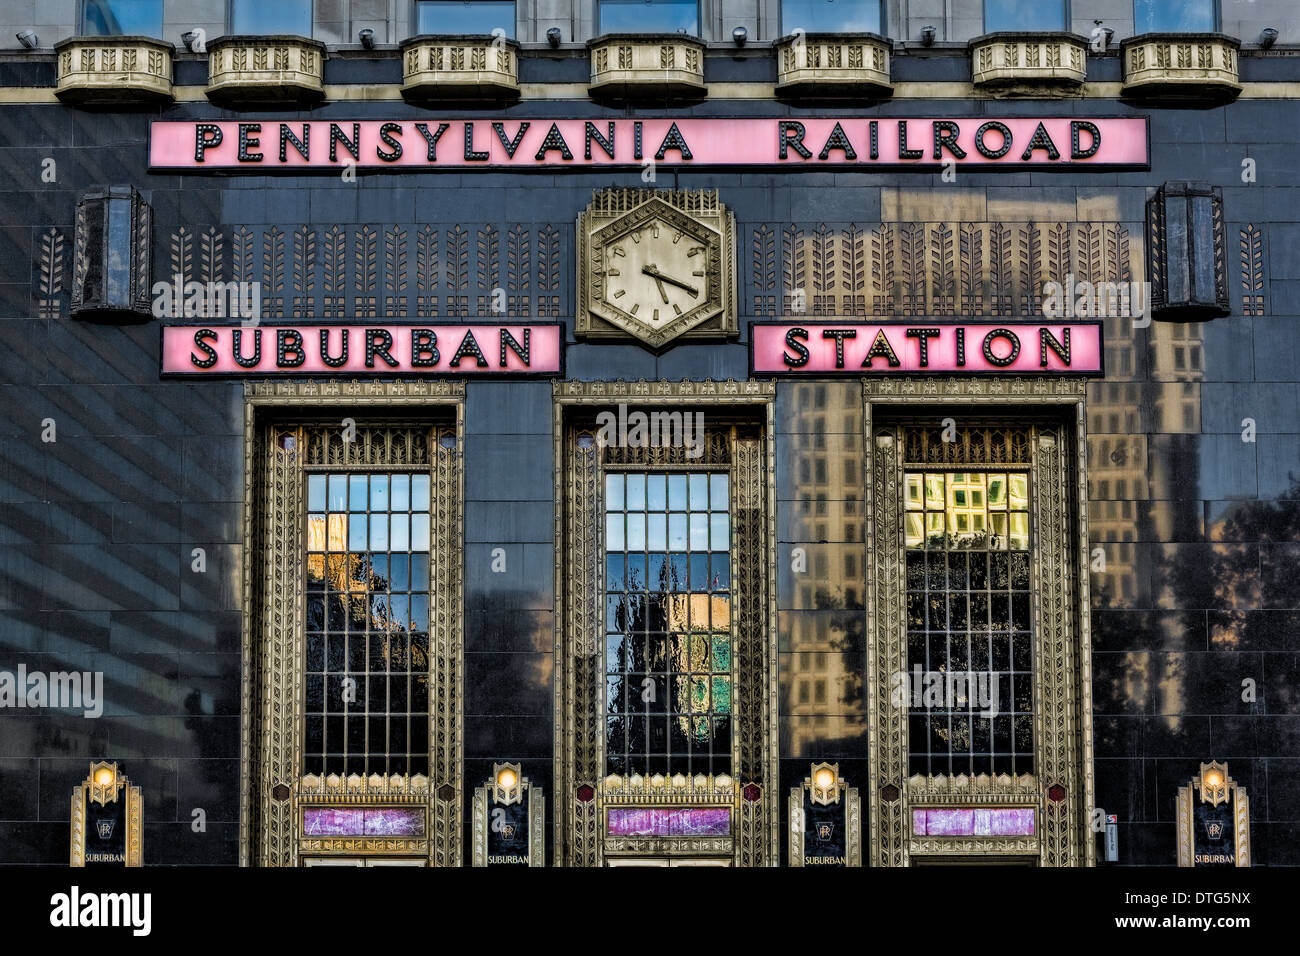 The art deco facade of the Pennsylvania Railroad Suburban Station in the late afternoon. Stock Photo